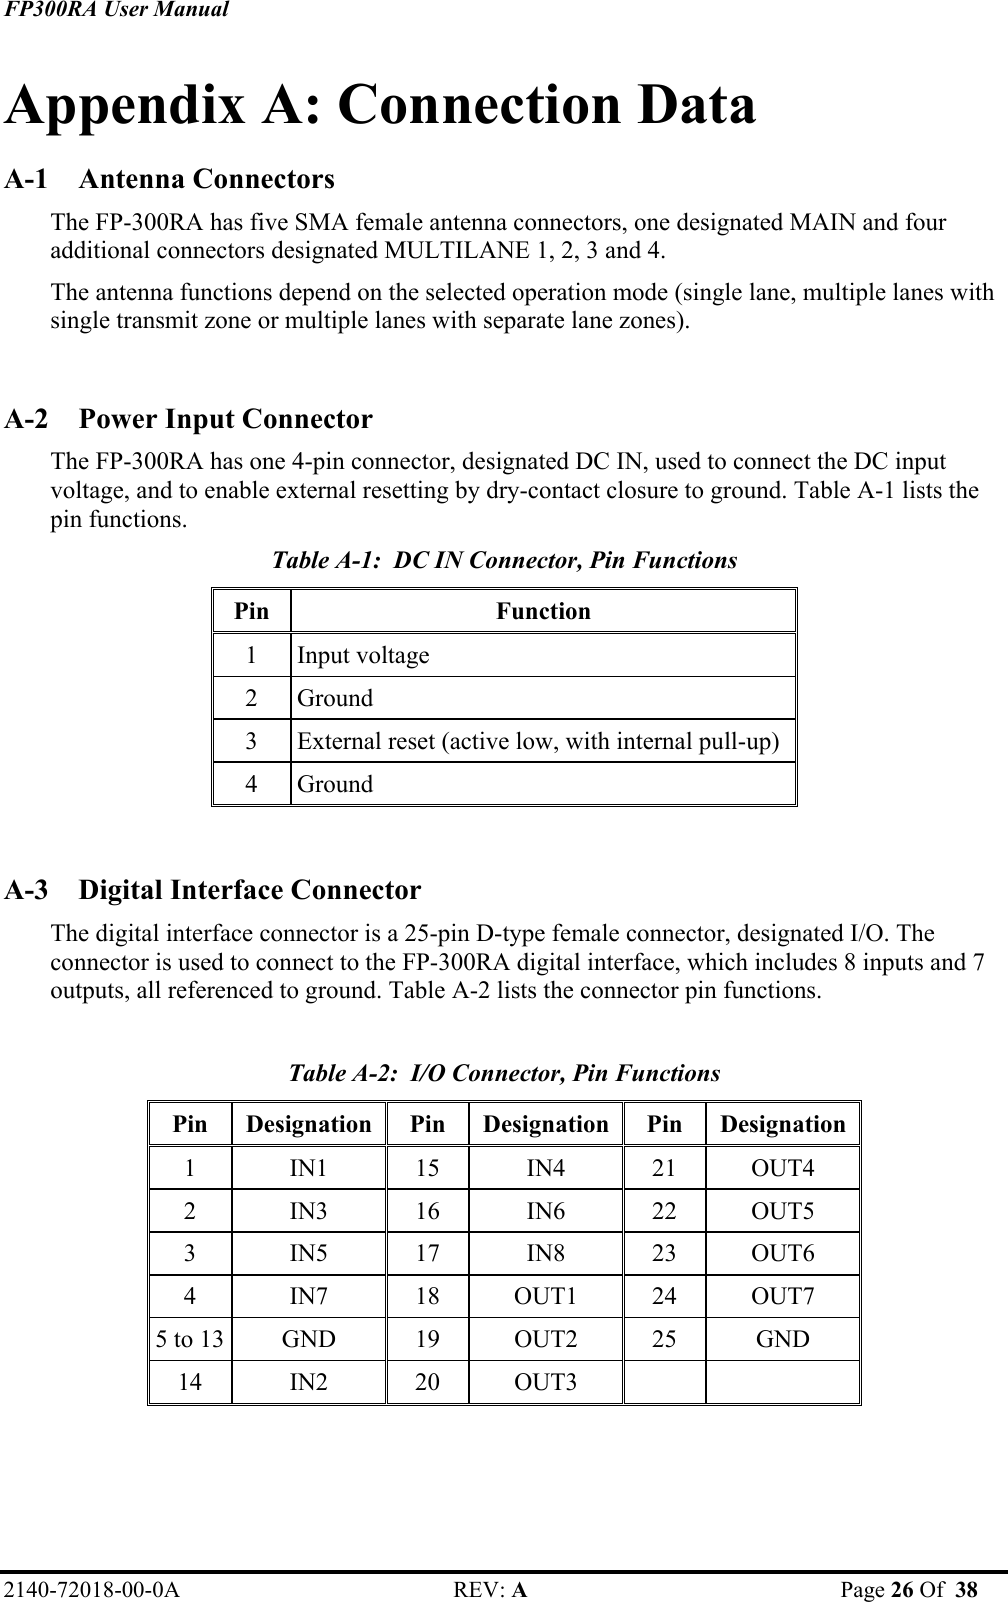 FP300RA User Manual 2140-72018-00-0A REV: A  Page 26 Of  38  Appendix A: Connection Data A-1 Antenna Connectors The FP-300RA has five SMA female antenna connectors, one designated MAIN and four additional connectors designated MULTILANE 1, 2, 3 and 4. The antenna functions depend on the selected operation mode (single lane, multiple lanes with single transmit zone or multiple lanes with separate lane zones).  A-2  Power Input Connector The FP-300RA has one 4-pin connector, designated DC IN, used to connect the DC input voltage, and to enable external resetting by dry-contact closure to ground. Table A-1 lists the pin functions. Table A-1:  DC IN Connector, Pin Functions  Pin Function 1 Input voltage 2 Ground 3  External reset (active low, with internal pull-up) 4 Ground   A-3  Digital Interface Connector The digital interface connector is a 25-pin D-type female connector, designated I/O. The connector is used to connect to the FP-300RA digital interface, which includes 8 inputs and 7 outputs, all referenced to ground. Table A-2 lists the connector pin functions.  Table A-2:  I/O Connector, Pin Functions  Pin Designation Pin Designation Pin Designation 1  IN1 15 IN4 21 OUT4 2  IN3 16 IN6 22 OUT5 3  IN5 17 IN8 23 OUT6 4  IN7  18 OUT1 24 OUT7 5 to 13  GND  19  OUT2  25  GND 14 IN2 20 OUT3     